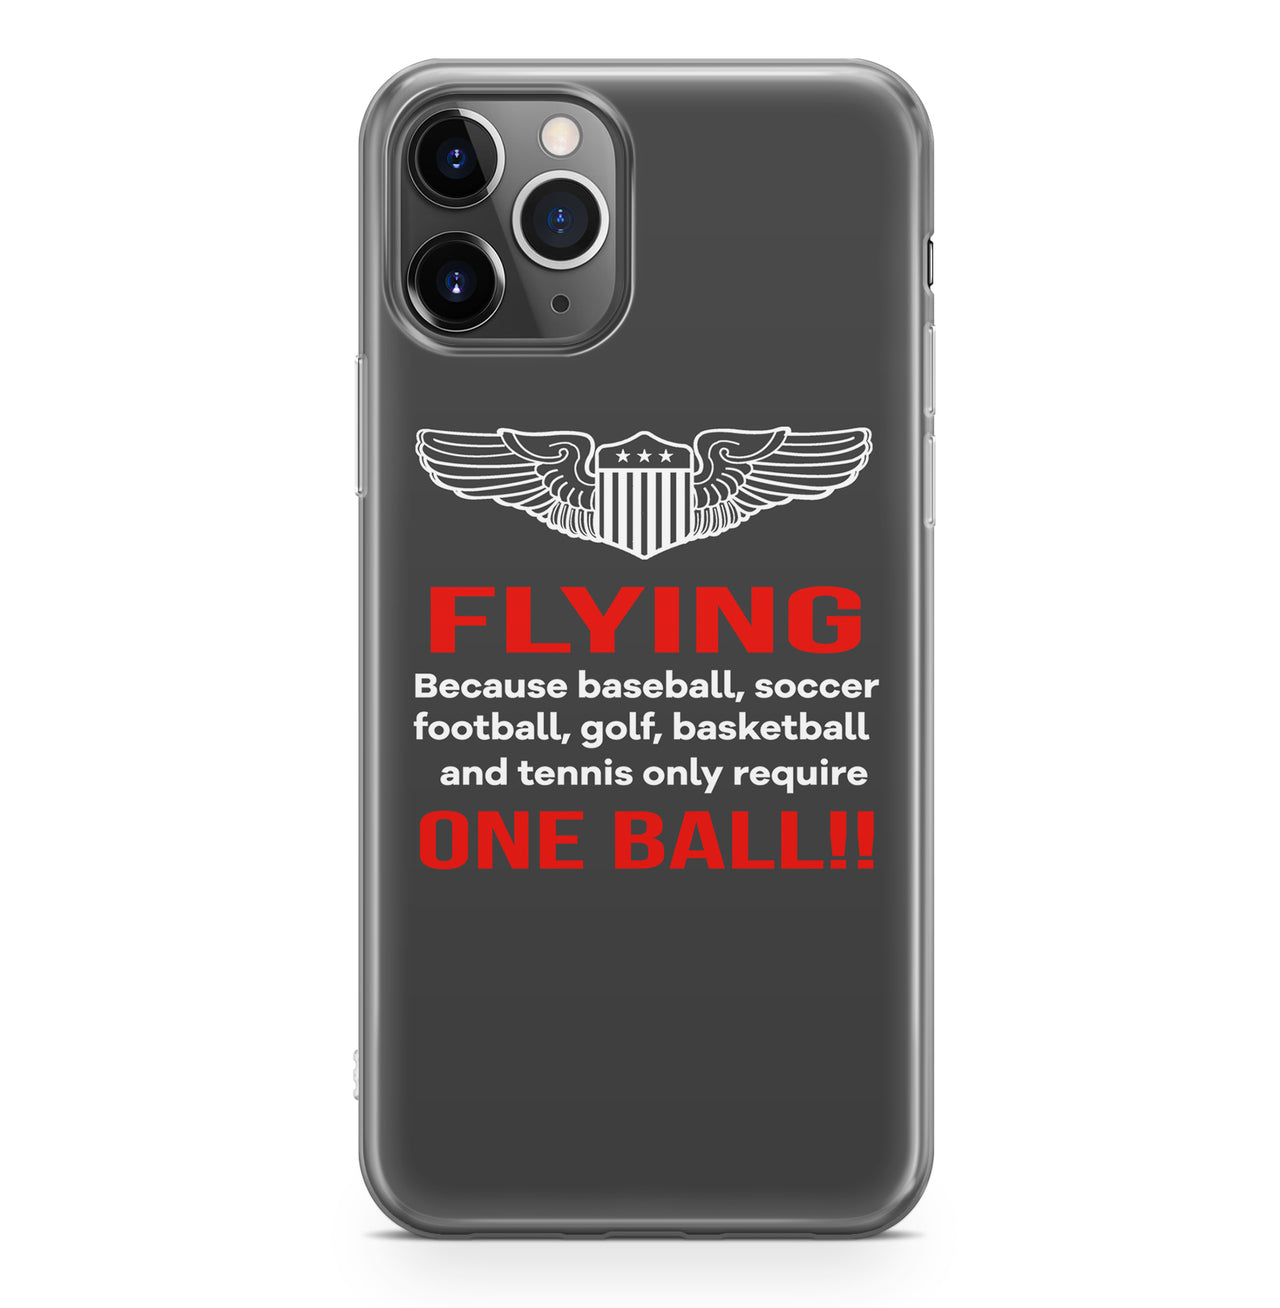 Flying One Ball Designed iPhone Cases